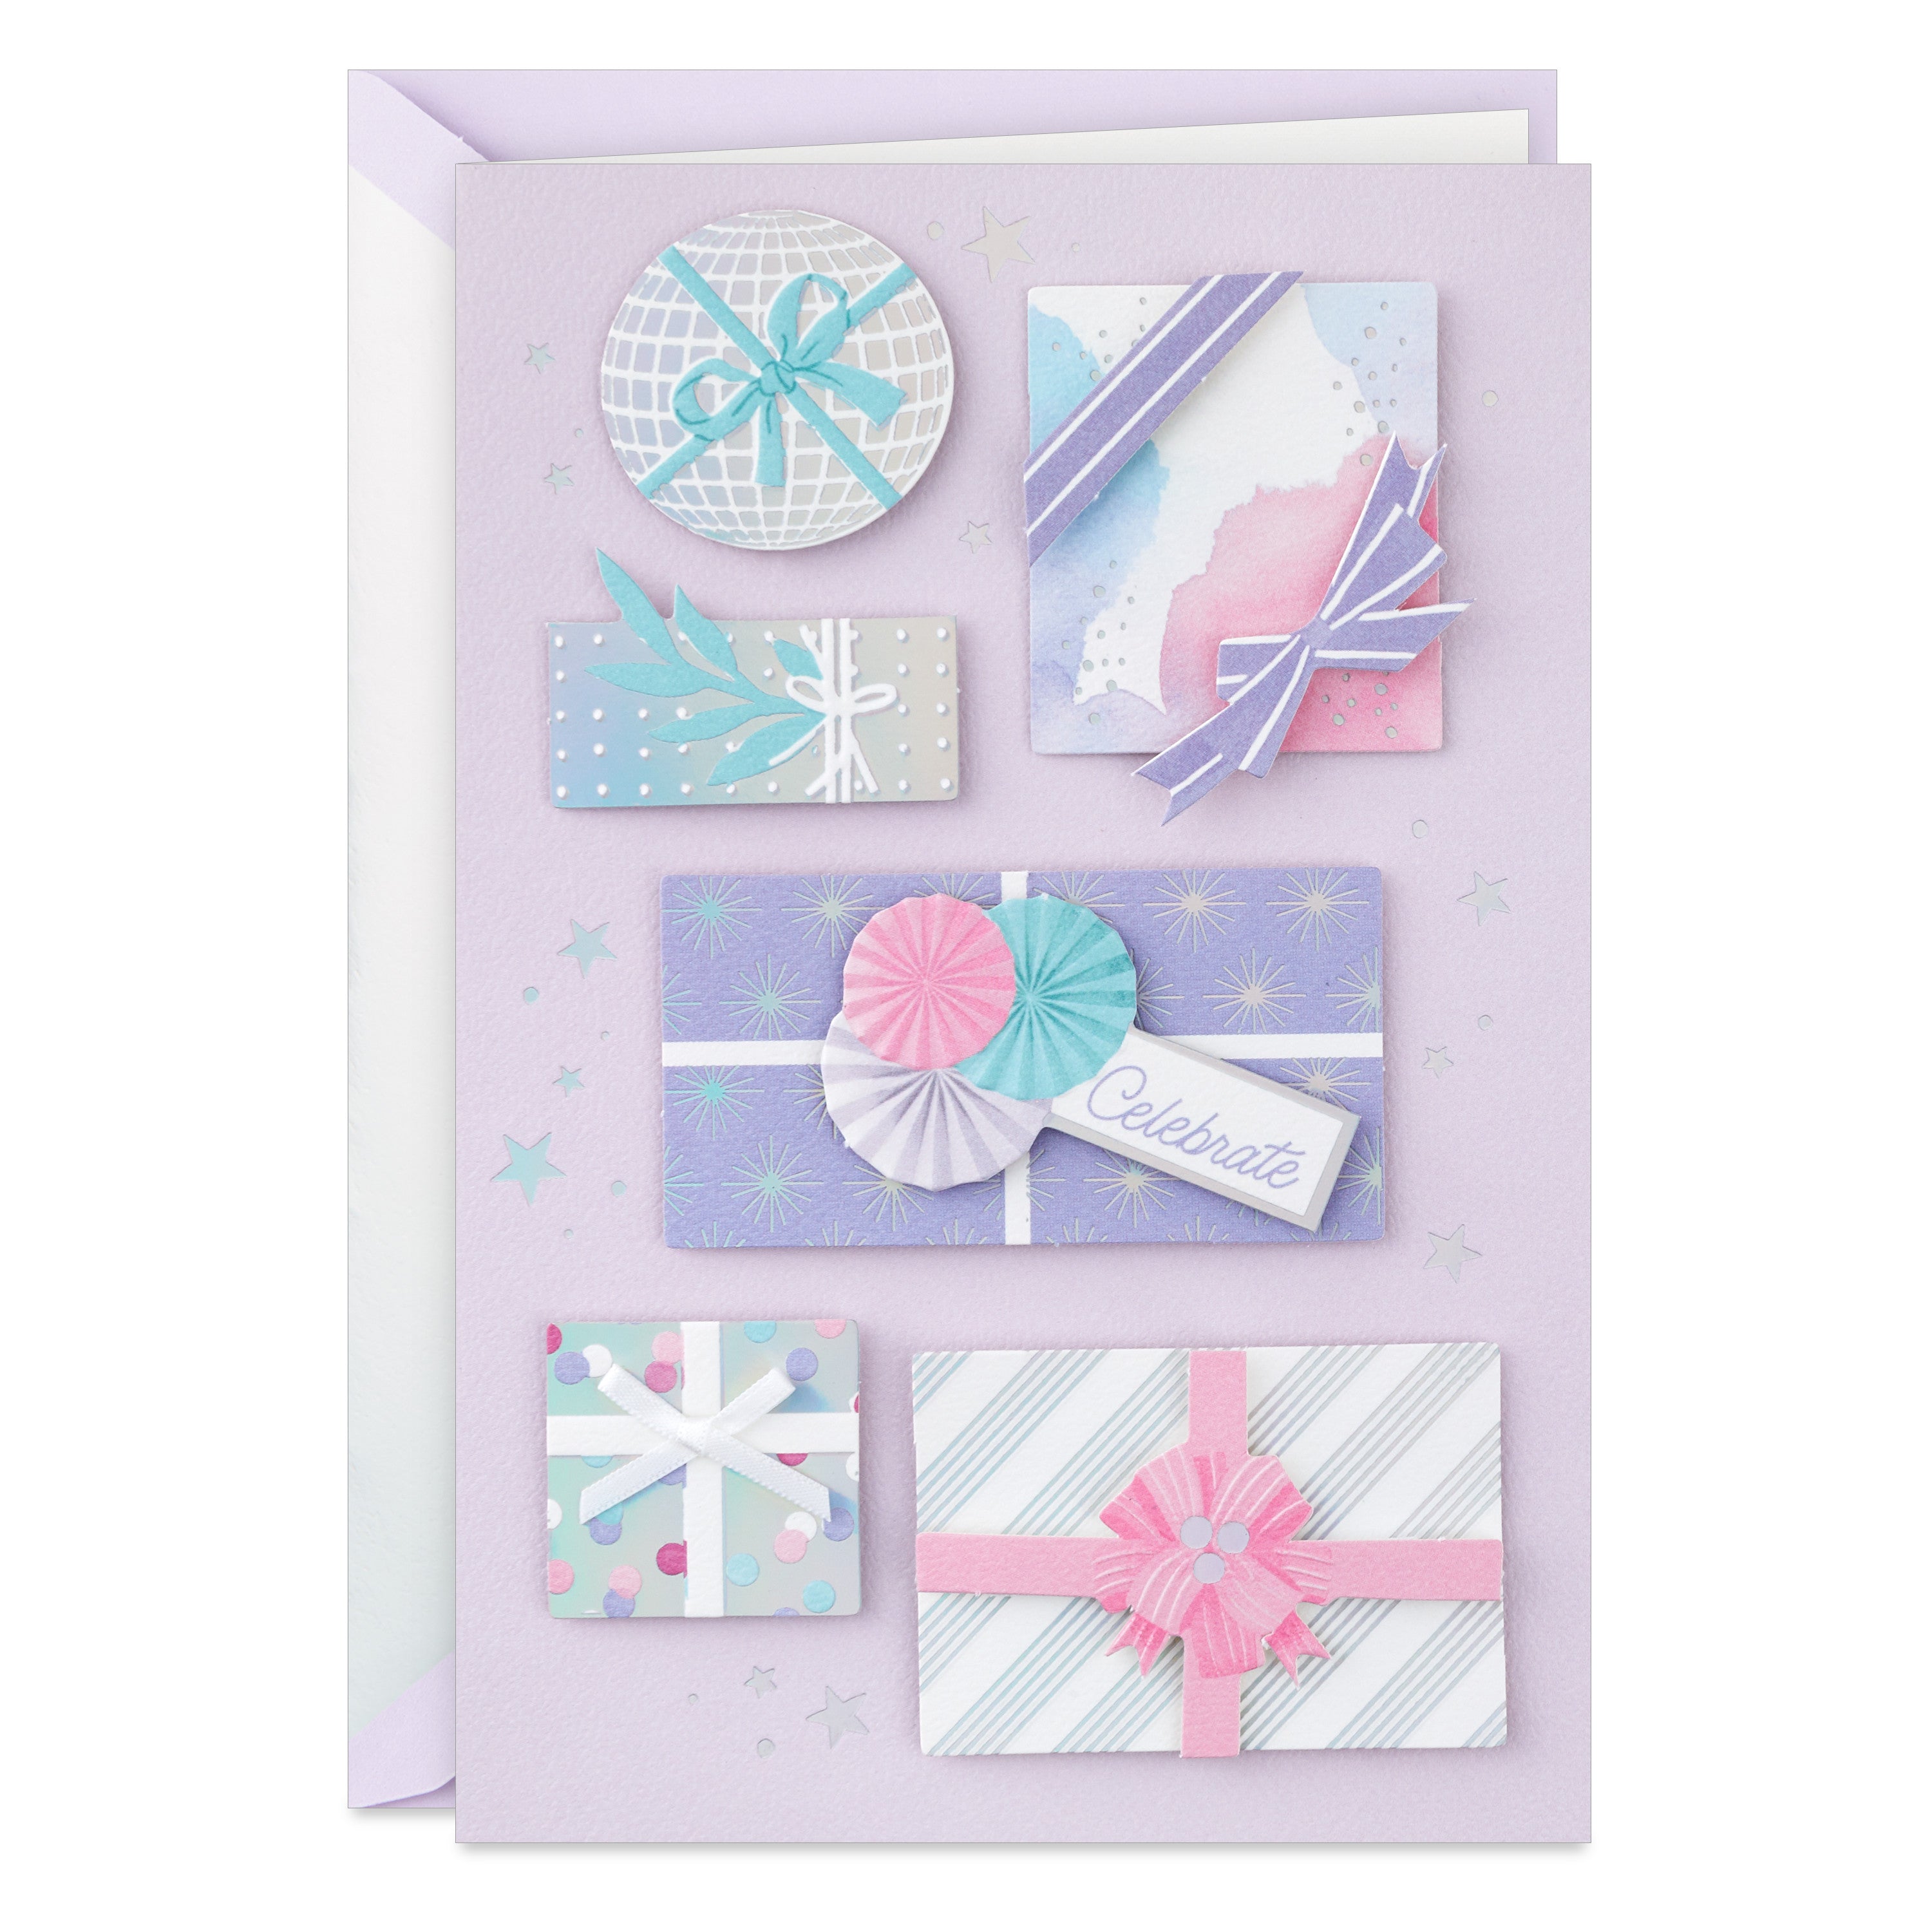 Hallmark Signature Birthday Card for Women (Wrapped Gifts)